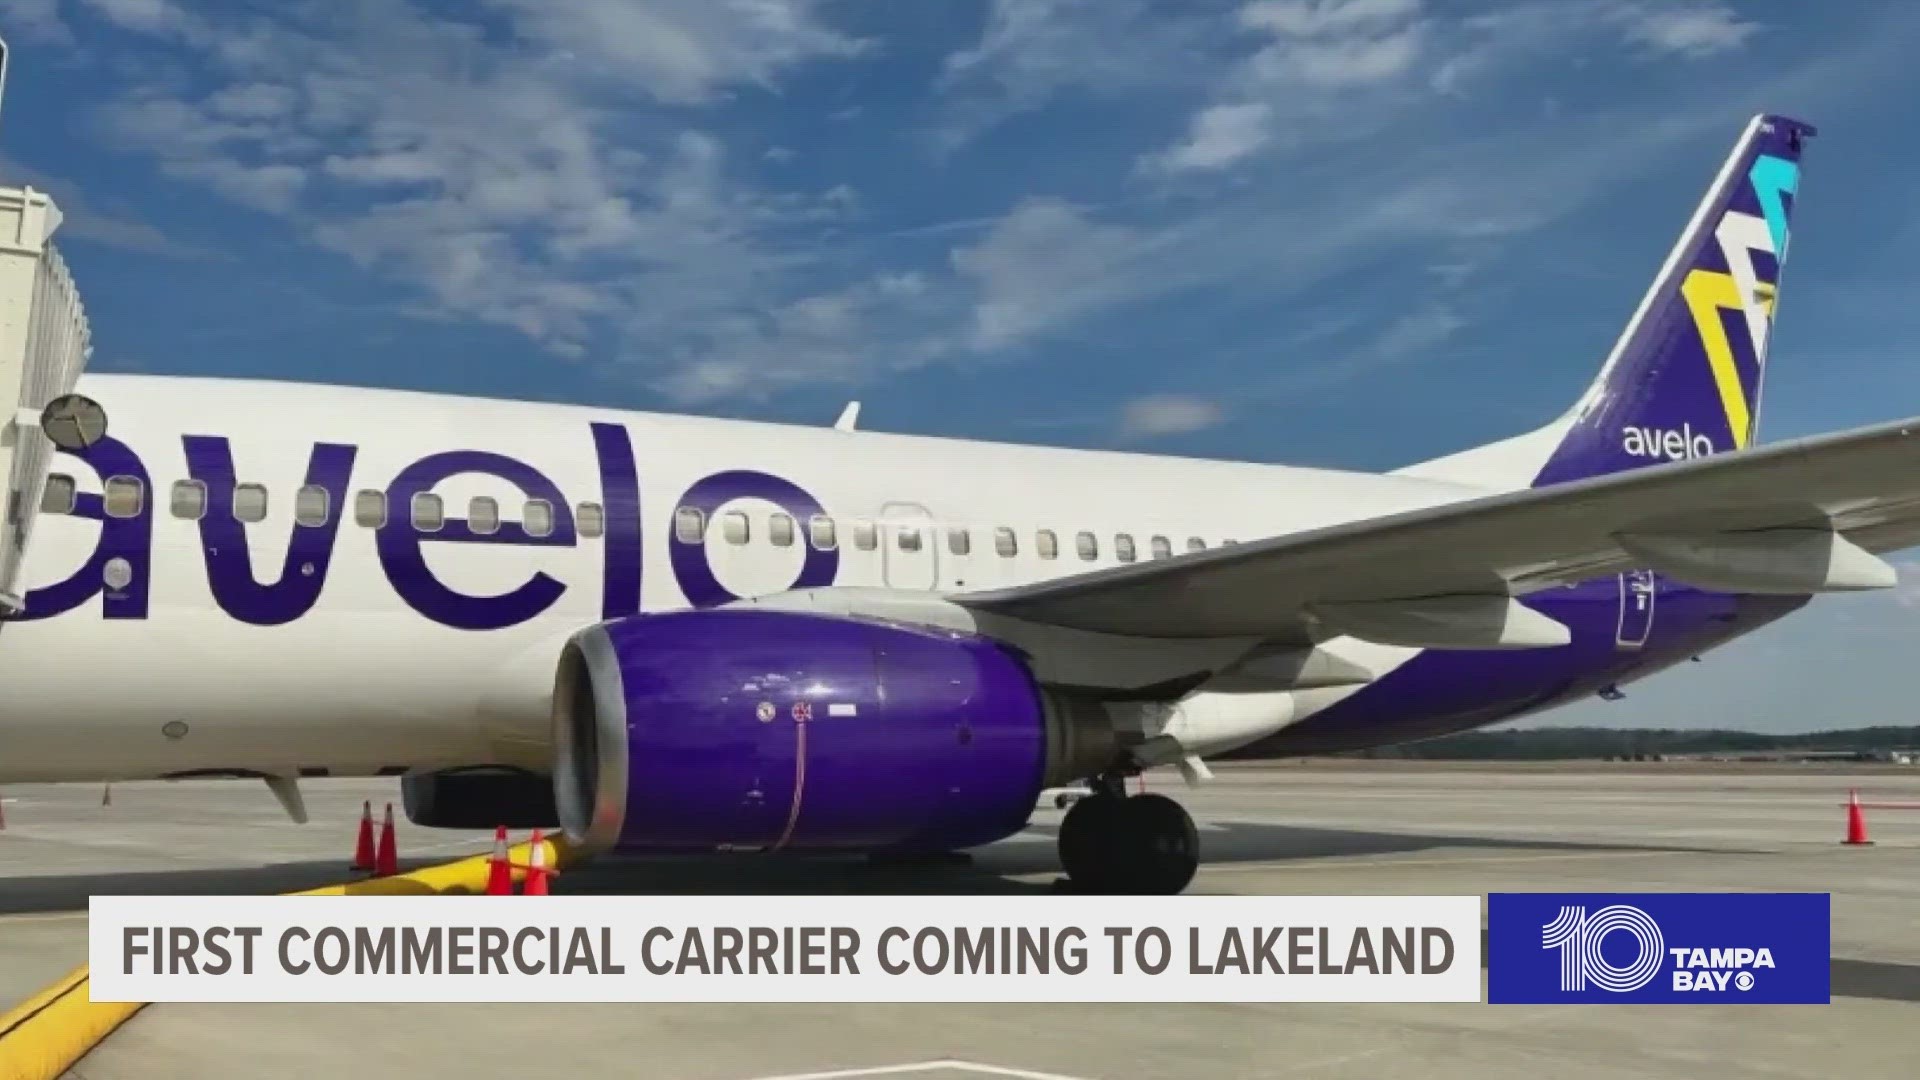 The partnership between the airline and Lakeland International Airport marks the return of commercial flights after 12 years.